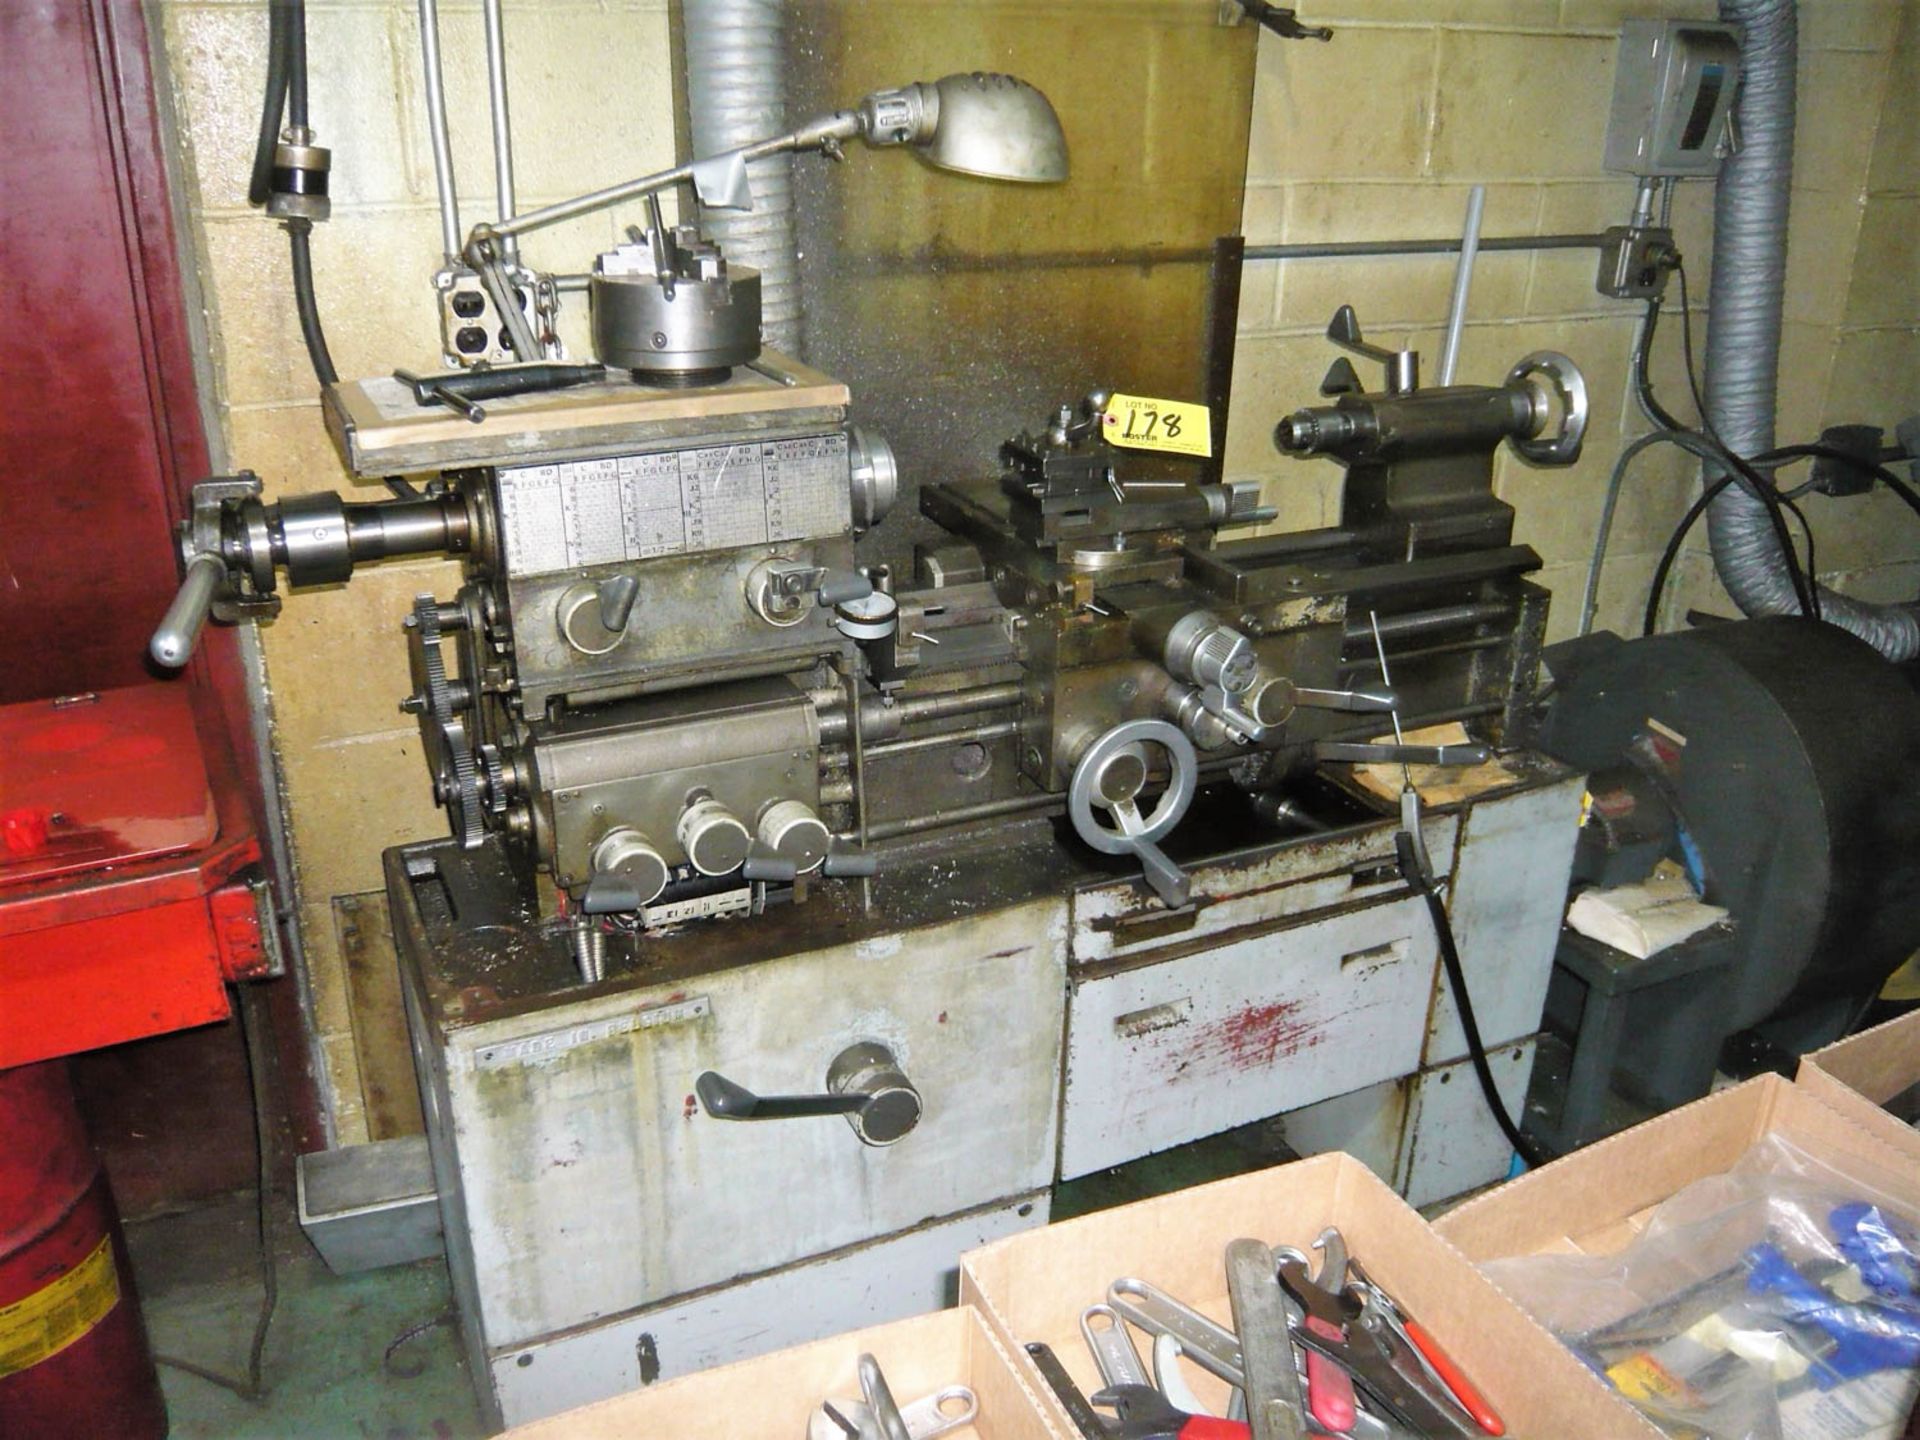 MADE IN BELGIUM 12" X 20" LATHE, INCH / METRIC THREADING, TOOL POST, 5C COLLET CHUCK, 6" 3-JAW